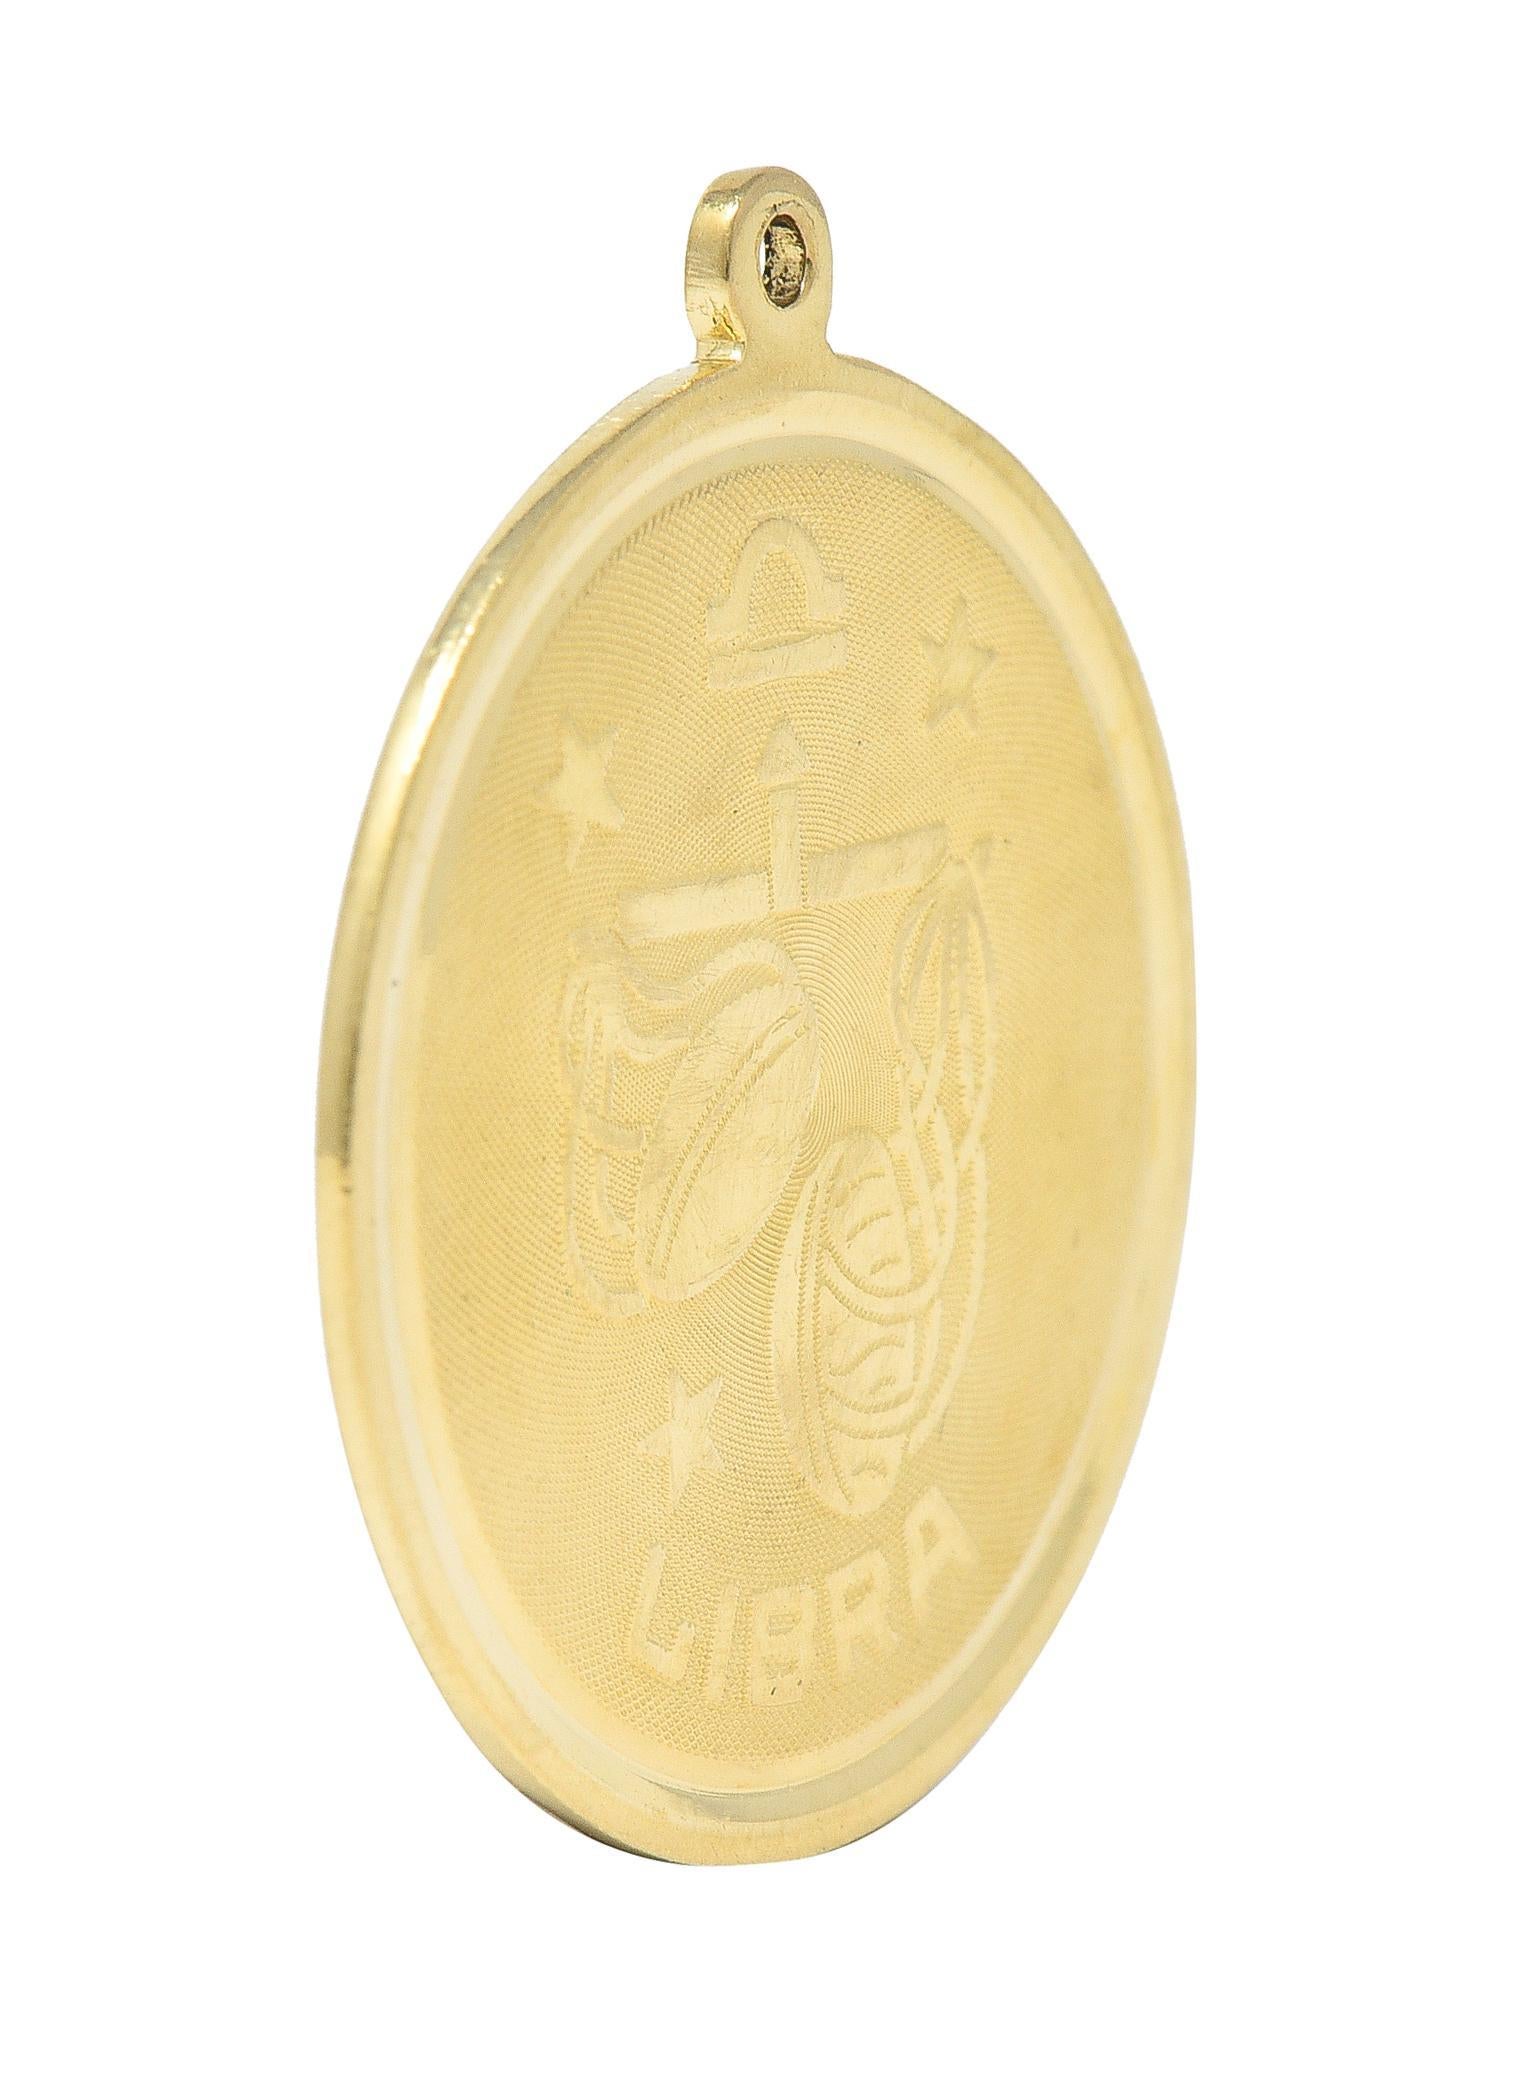 Designed as a round disk with high polished edges and a raised Libra zodiac motif
With the astrological Libra symbol, stylized scales, stars, and inscribed 'Libra'
With a finely cross-hatch textured recess
Completed by pierced bale
Tested as 14